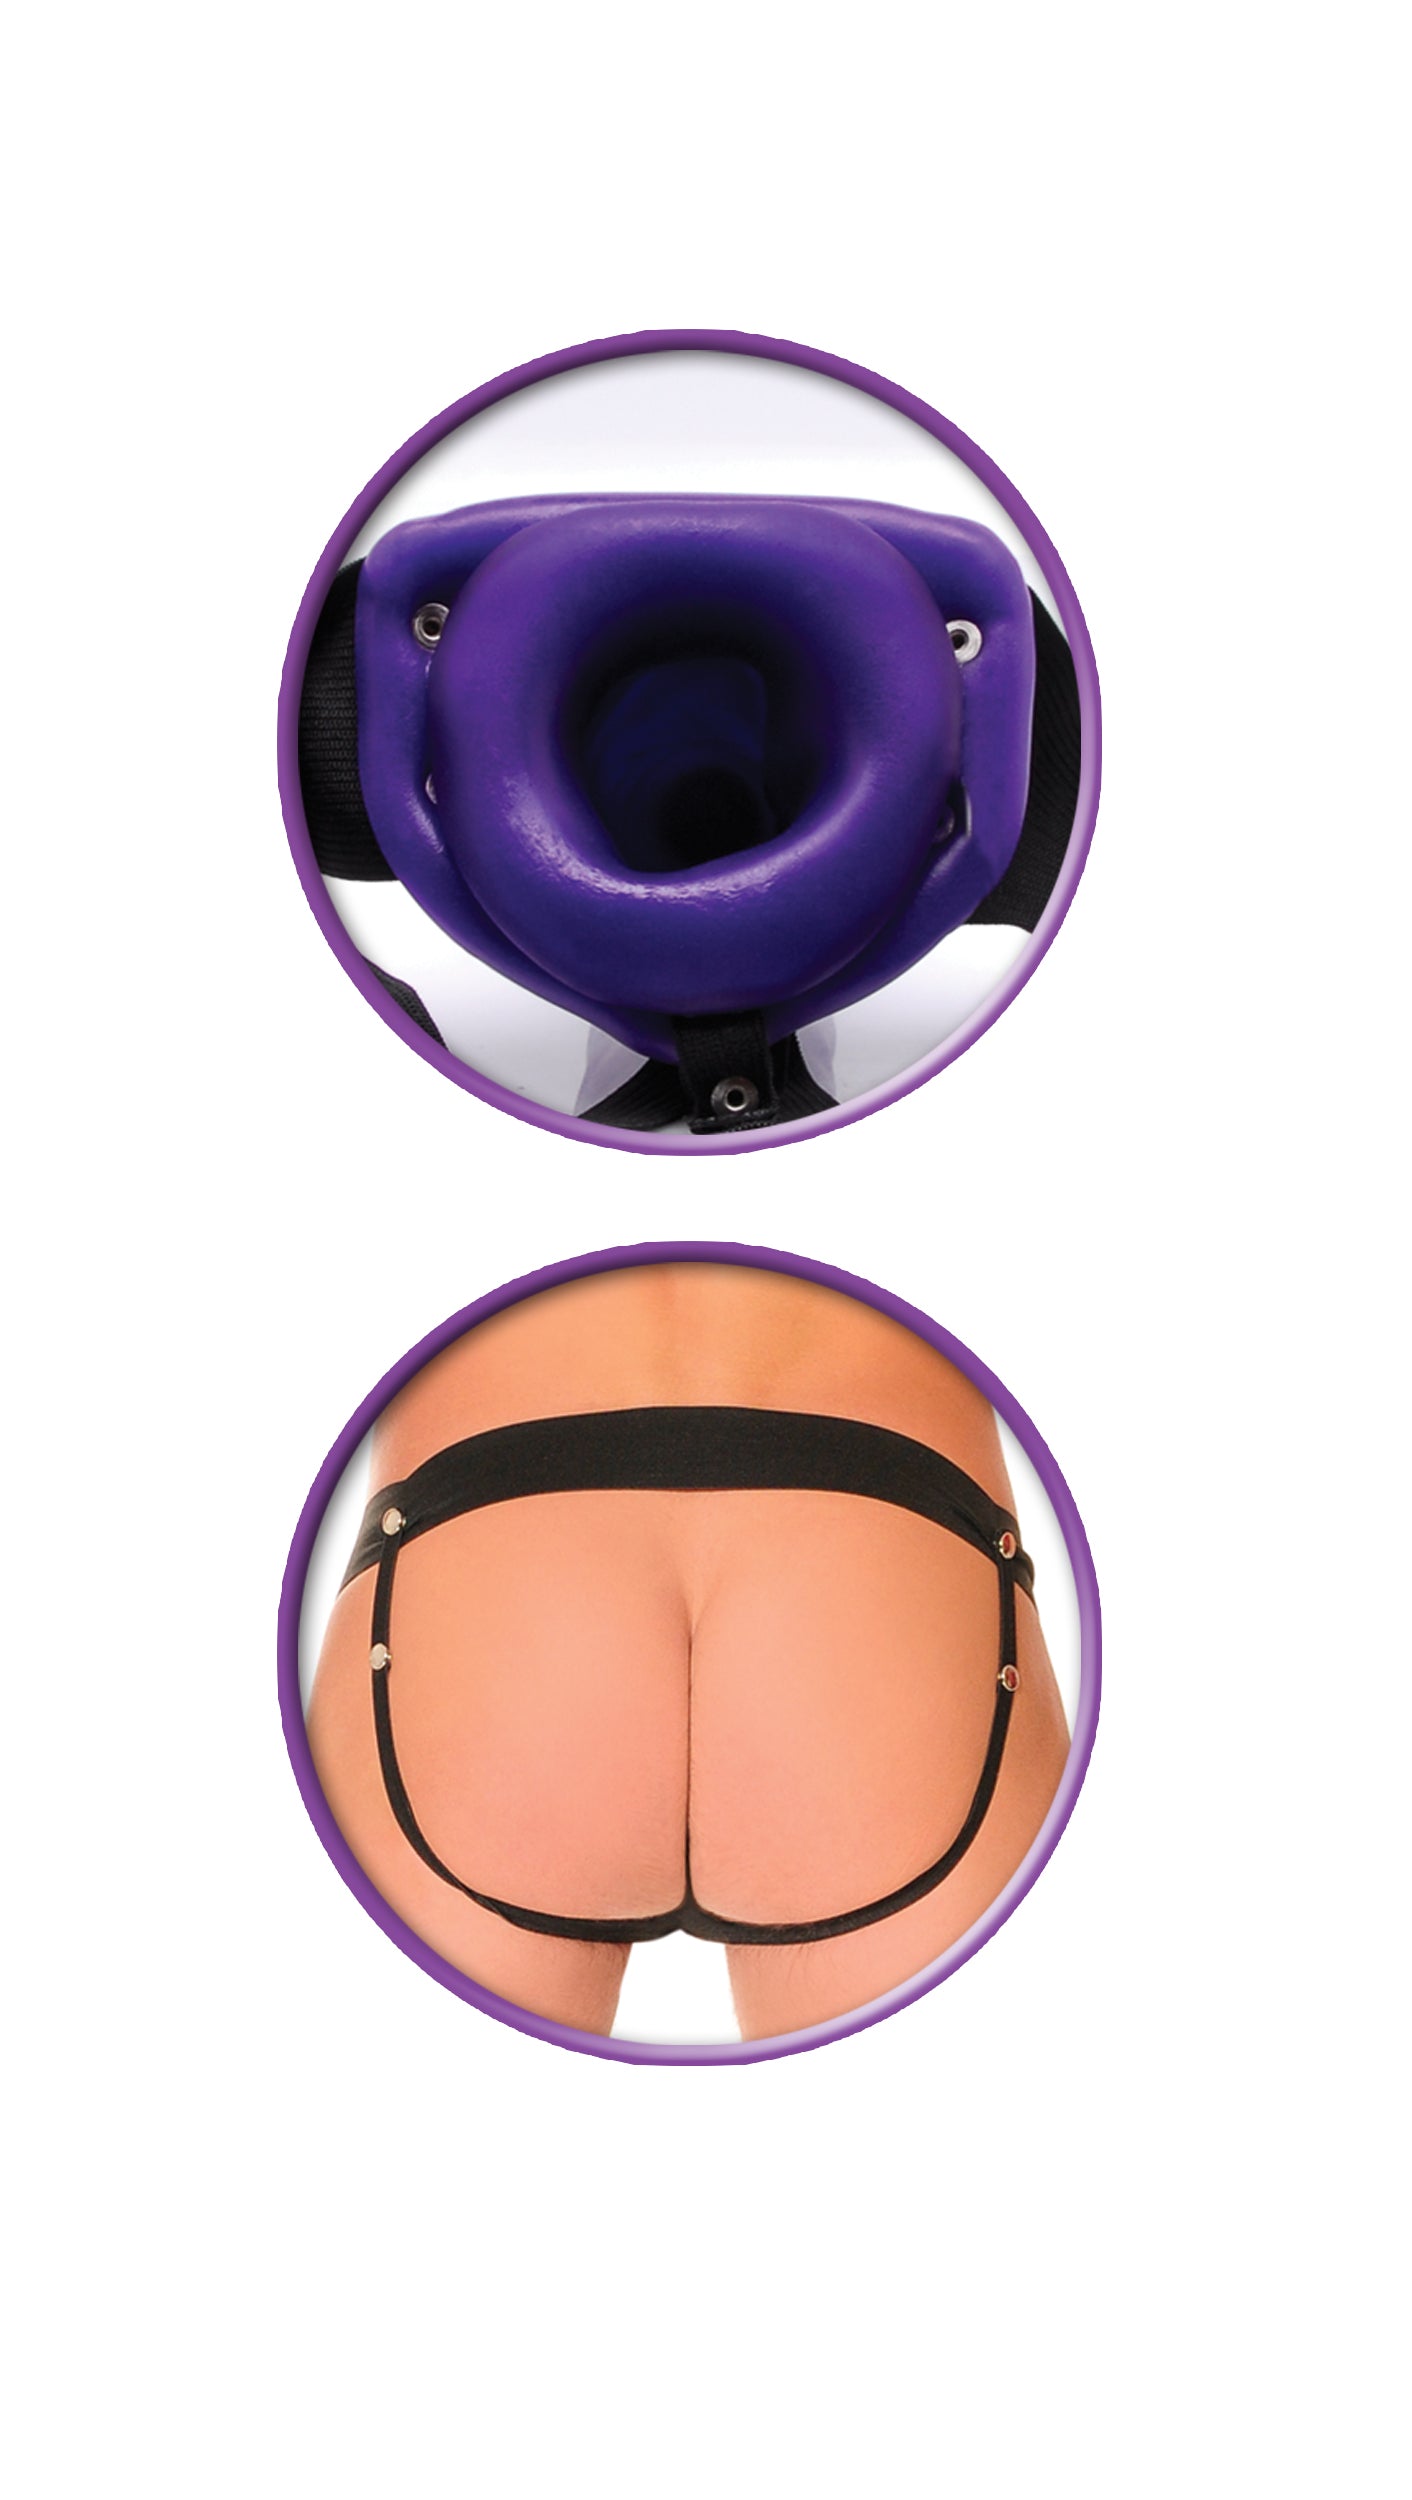 Fetish Fantasy Series for Him or Her Vibrating Hollow Strap-on - Purple PD3367-12